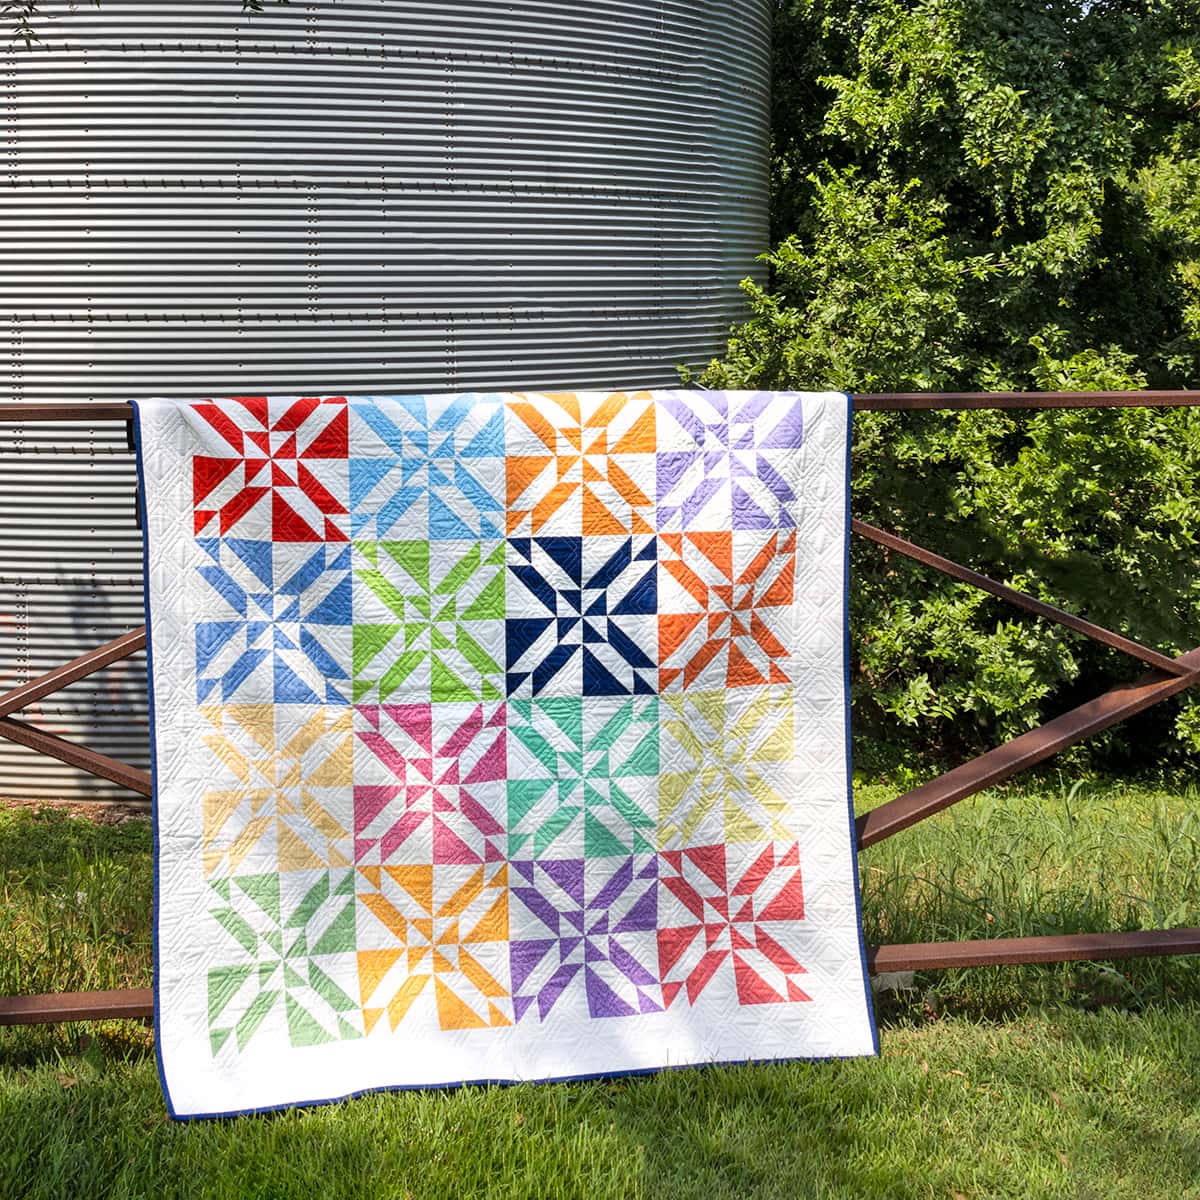 Classic Quilt Patterns: Traditional Quilt Vintage Quilt Patterns - The Jolly Jabber Blog